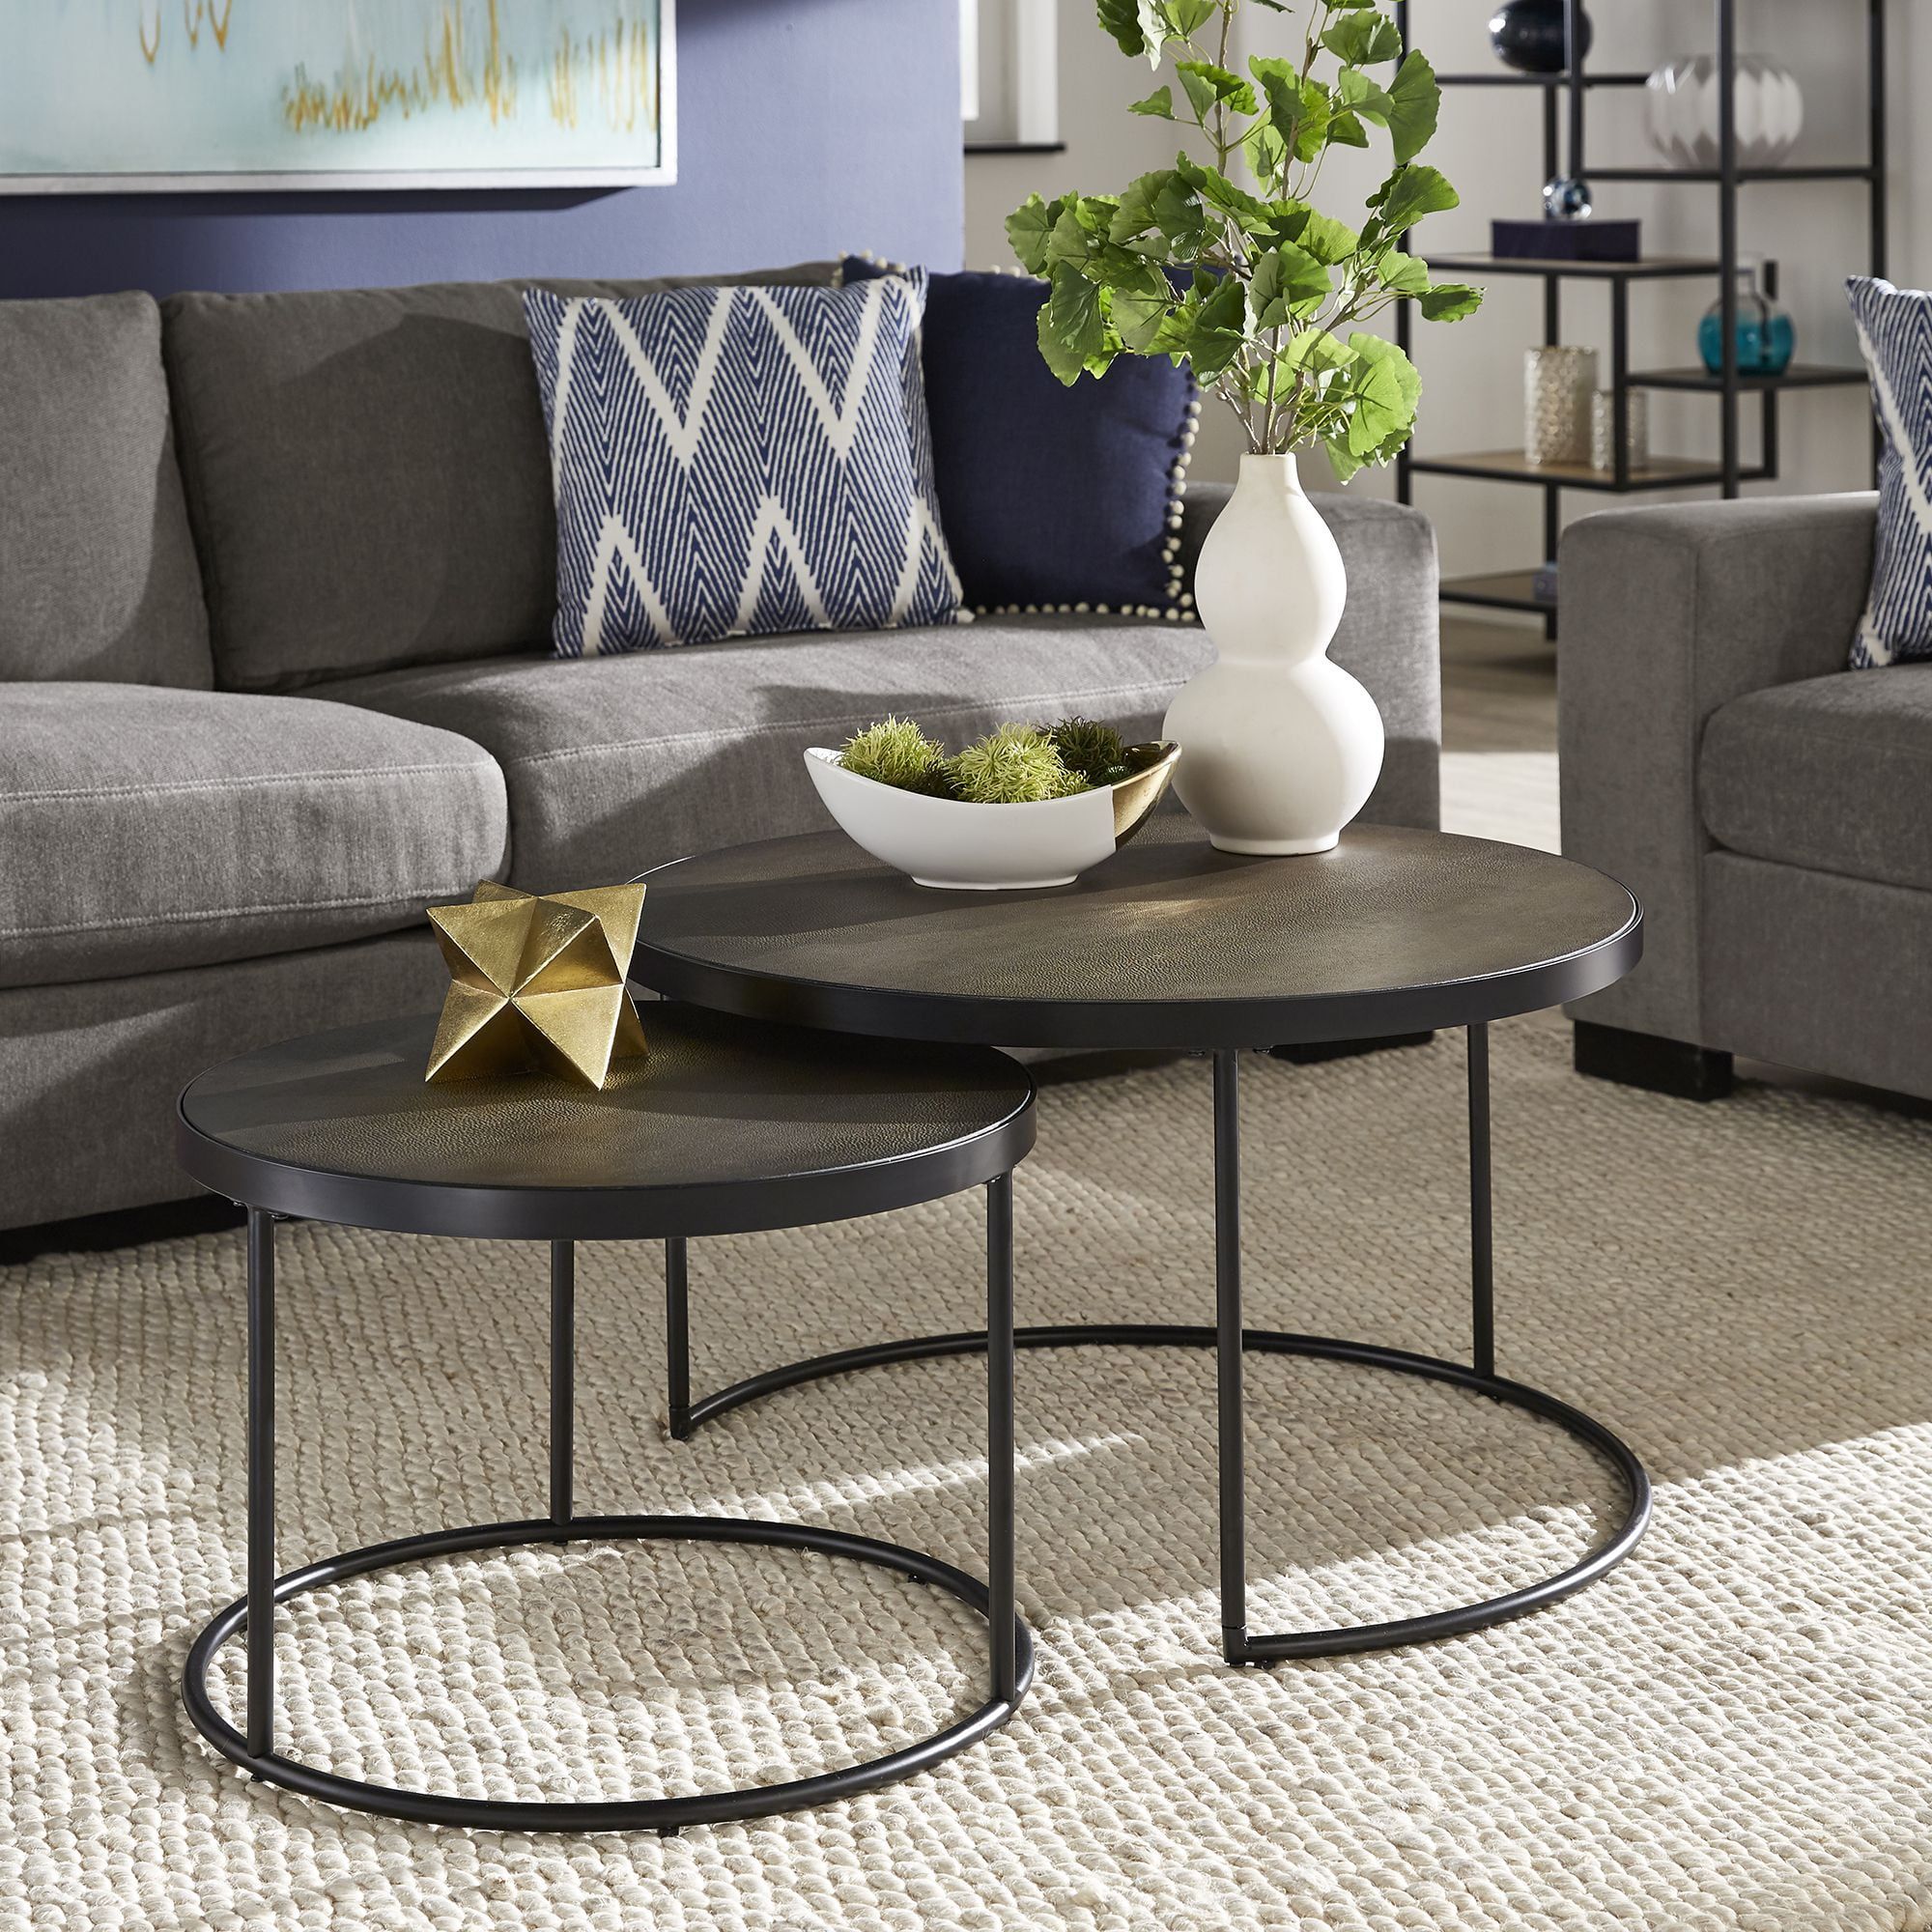 Weston Home Cambridge Black Finish Round Nesting Coffee Tables, Set Of With Full Black Round Coffee Tables (Gallery 4 of 20)